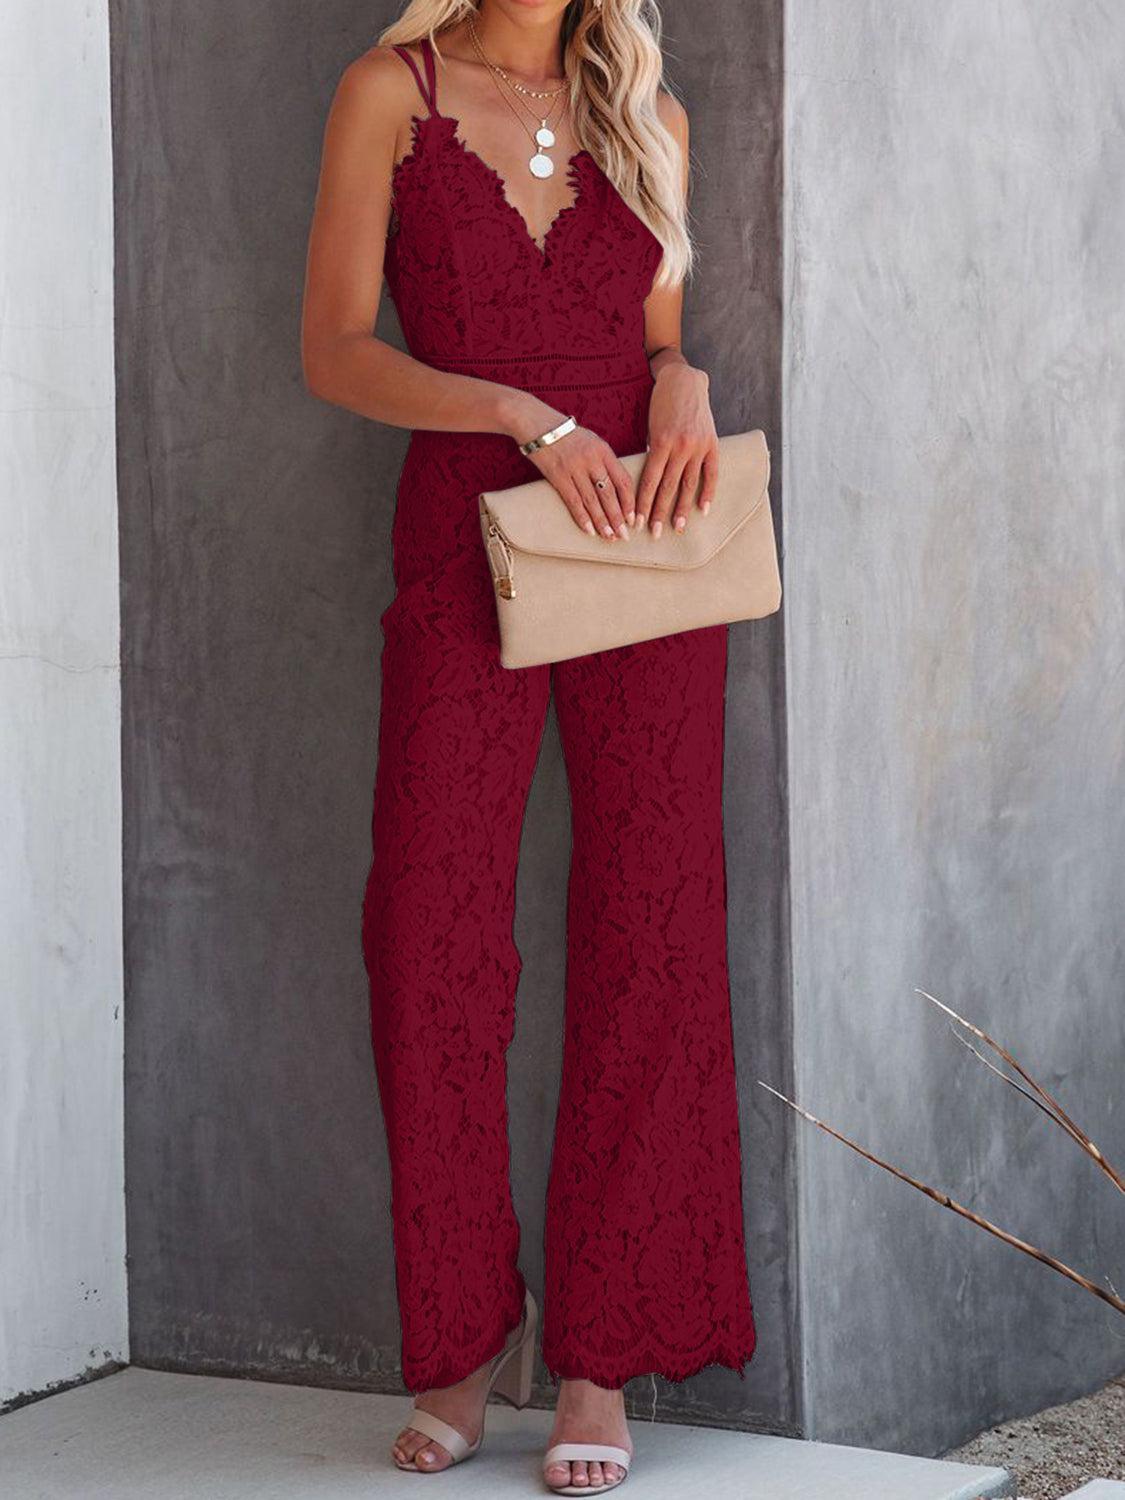 a woman wearing a red lace jumpsuit